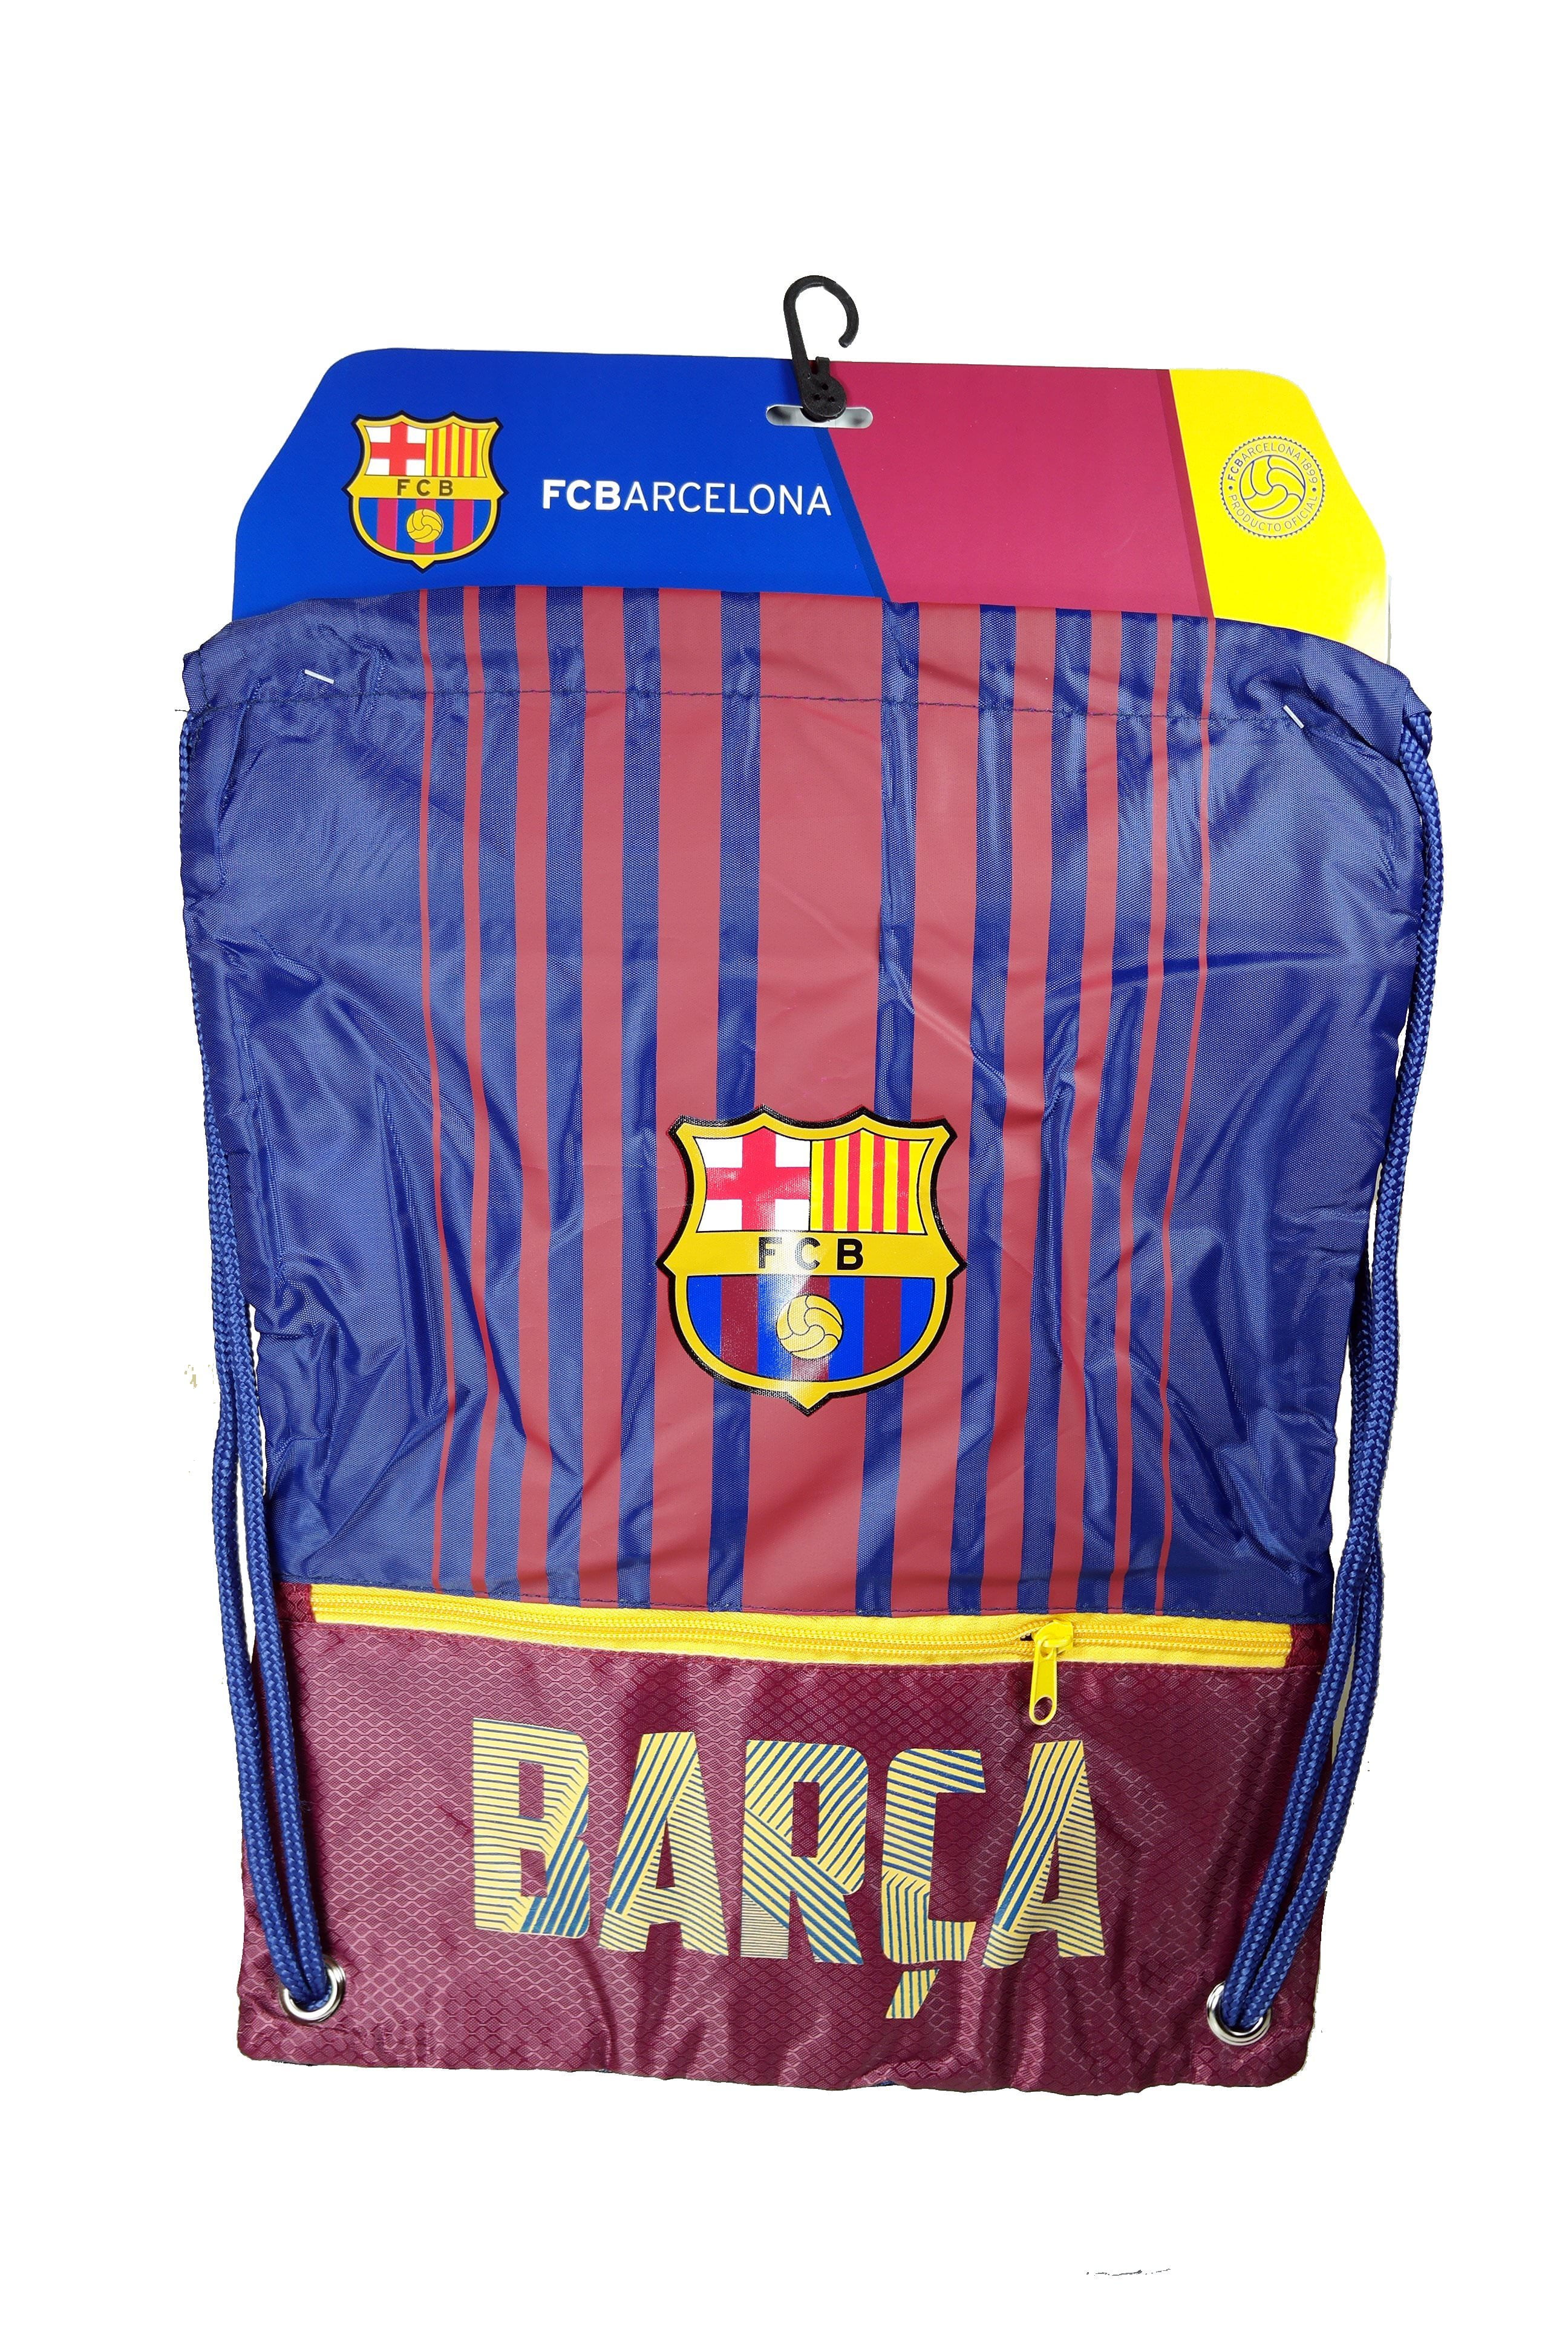 RHINOXGROUP FC Barcelona Authentic Official Licensed Soccer Drawstring Cinch Sack Bag 03 